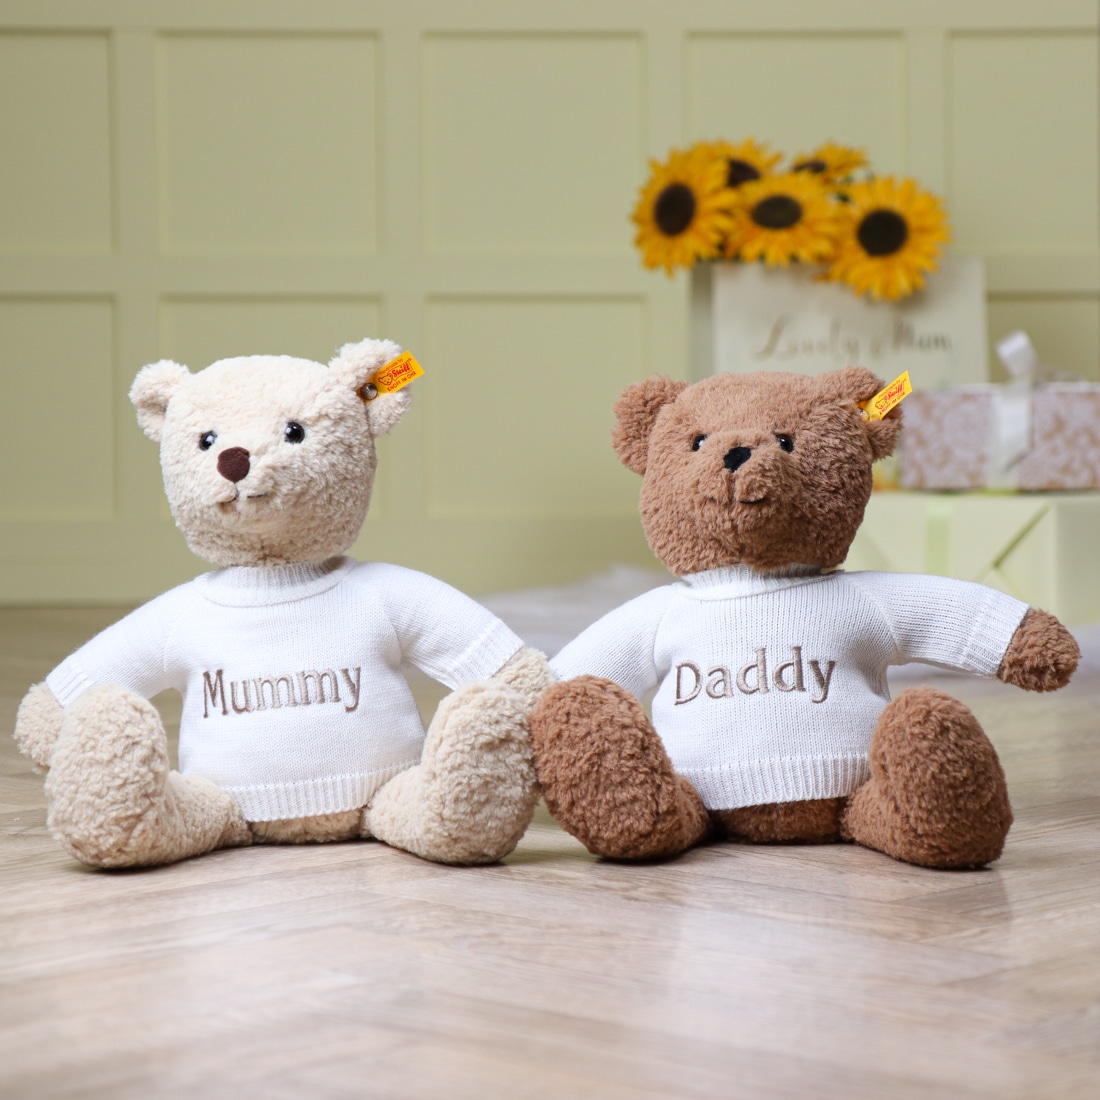 personalised daddy and mummy sweater teddy bear